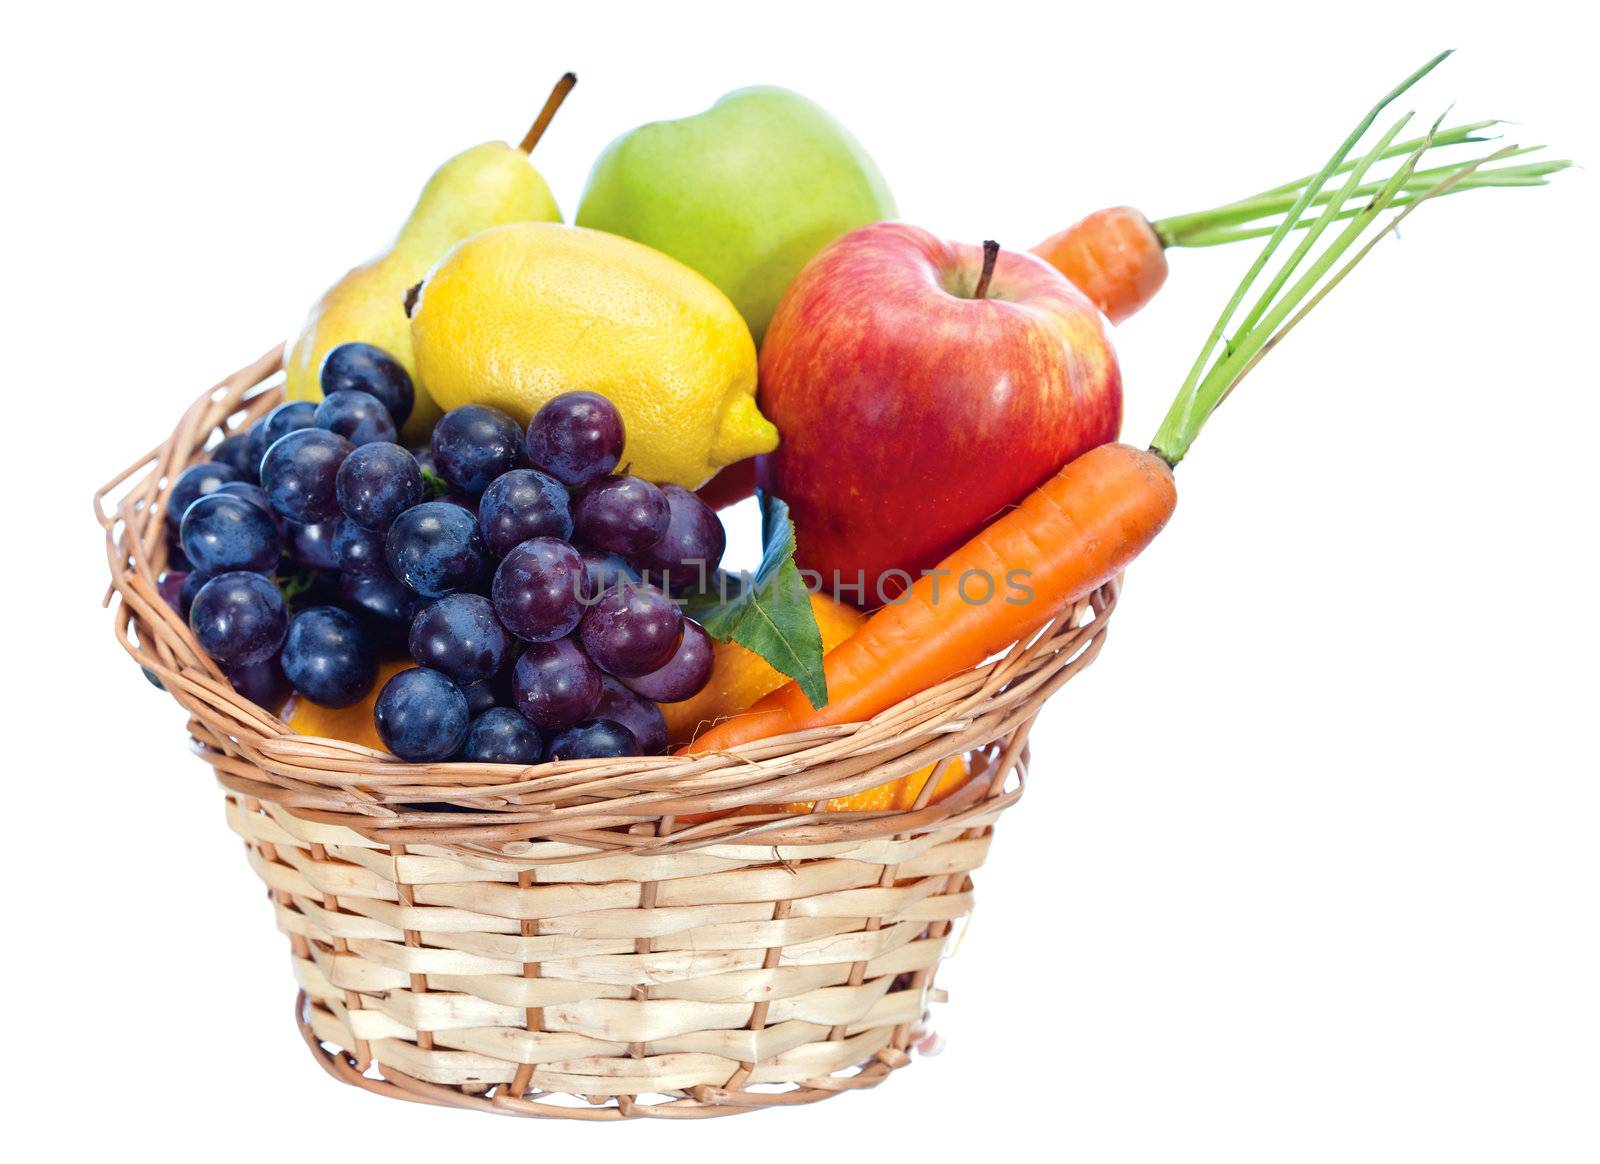 Basket with fruits and vegetables, isolated on white